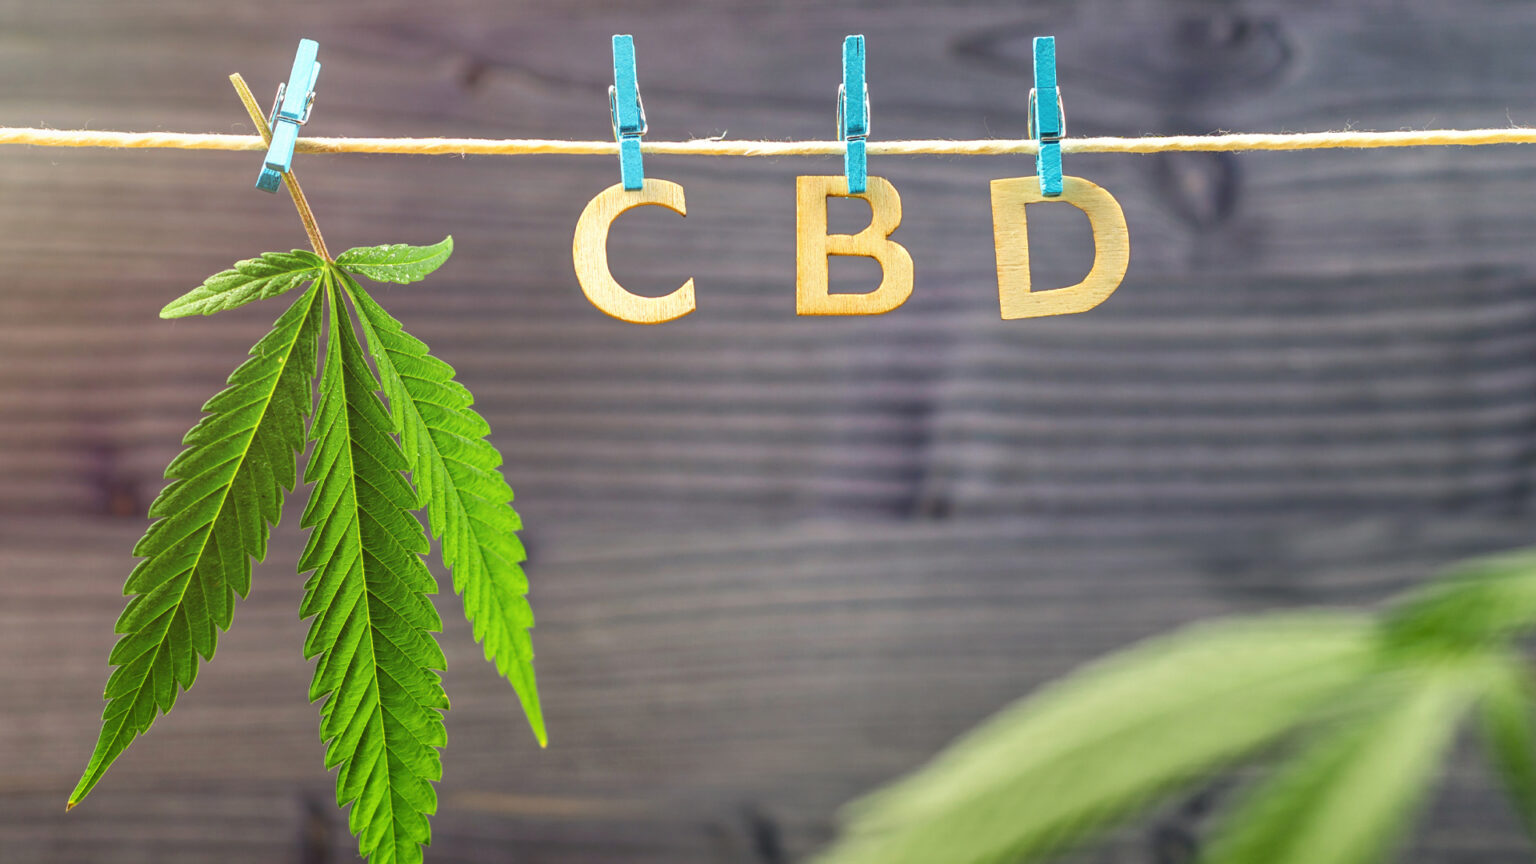 What Does “CBD” Stand For?